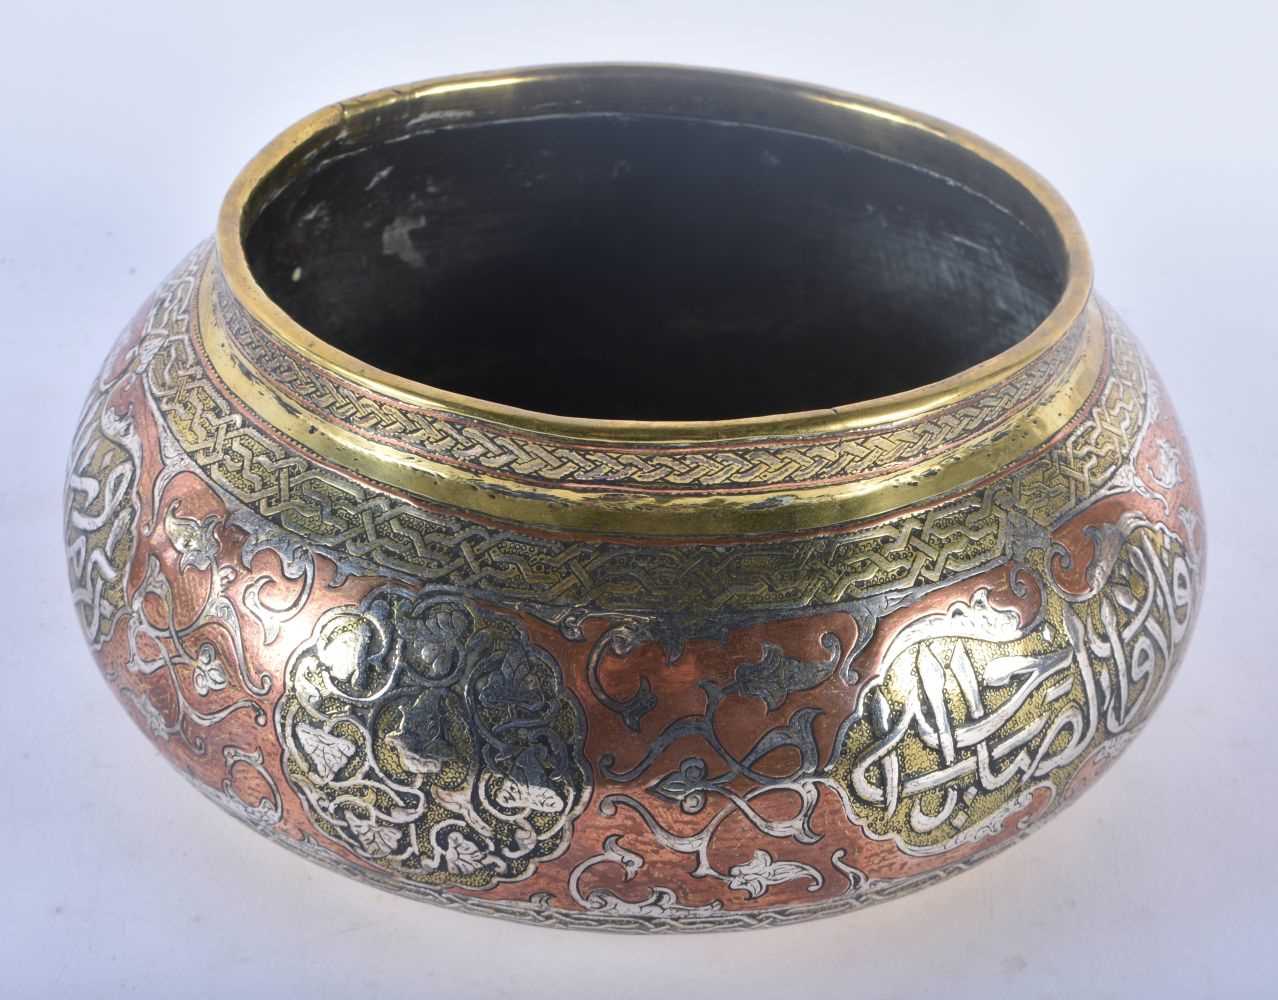 A 19TH CENTURY MIDDLE EASTERN SILVER INLAID MAMLUK BRONZE CENSER decorated with calligraphy and - Image 3 of 5